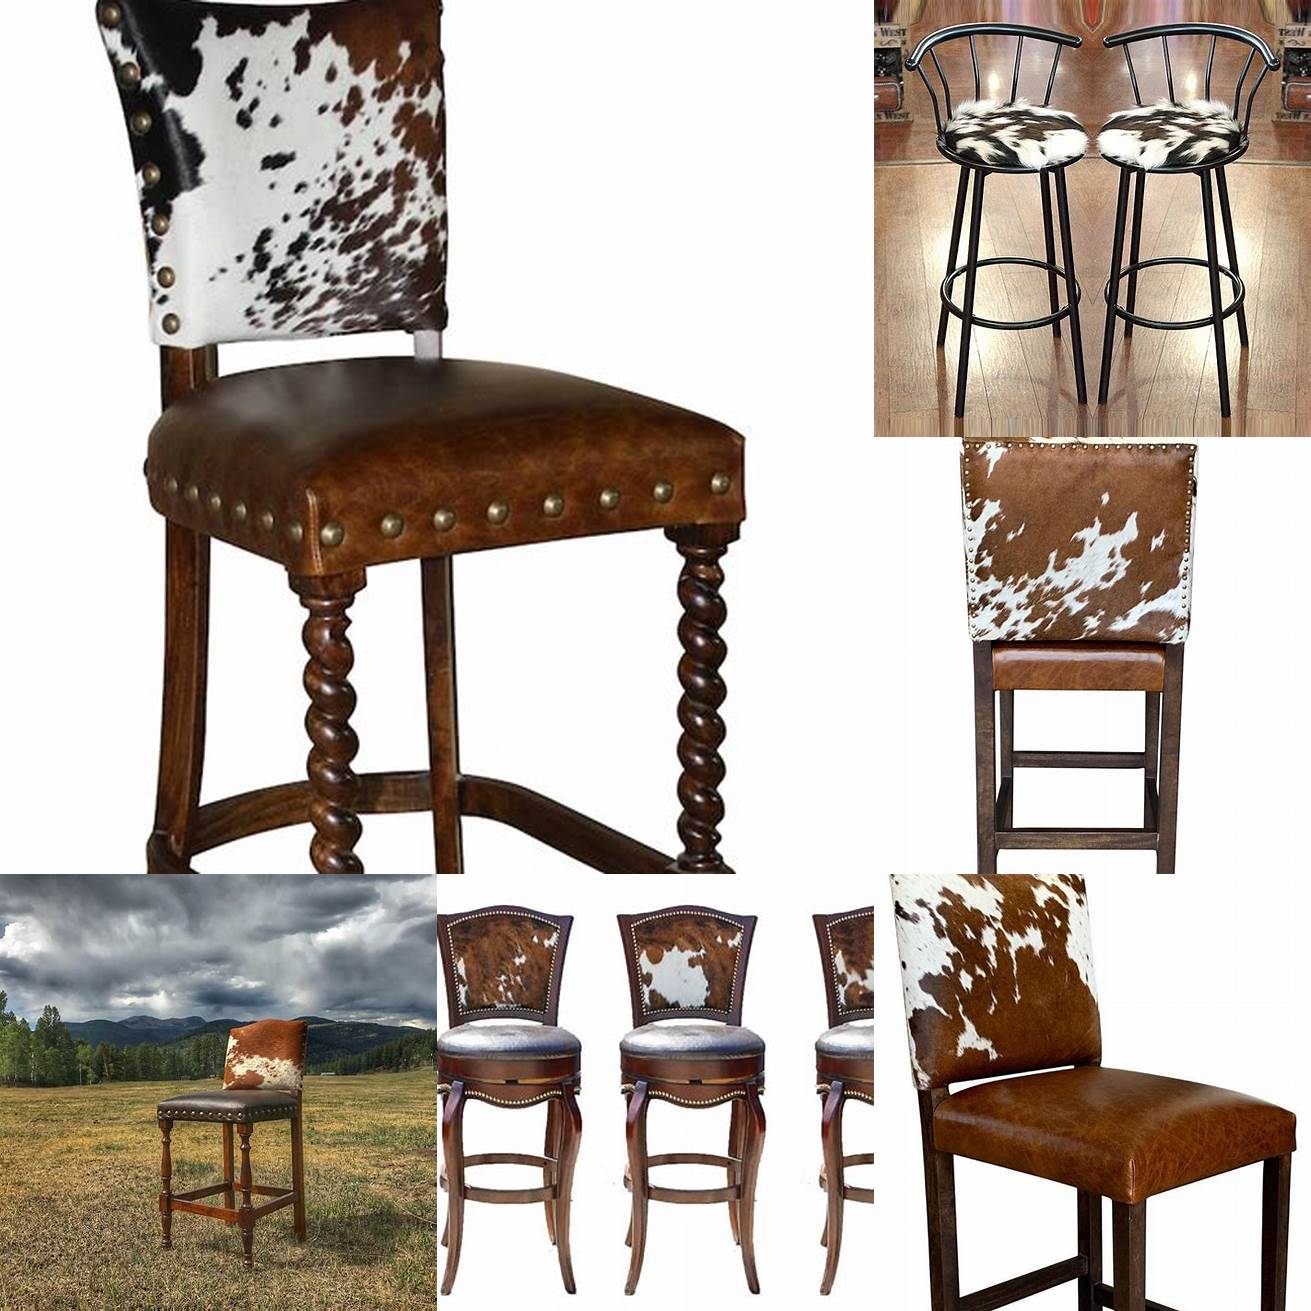 Cowhide bar stools add a touch of western charm to any kitchen or bar area They are available in a variety of styles and colors